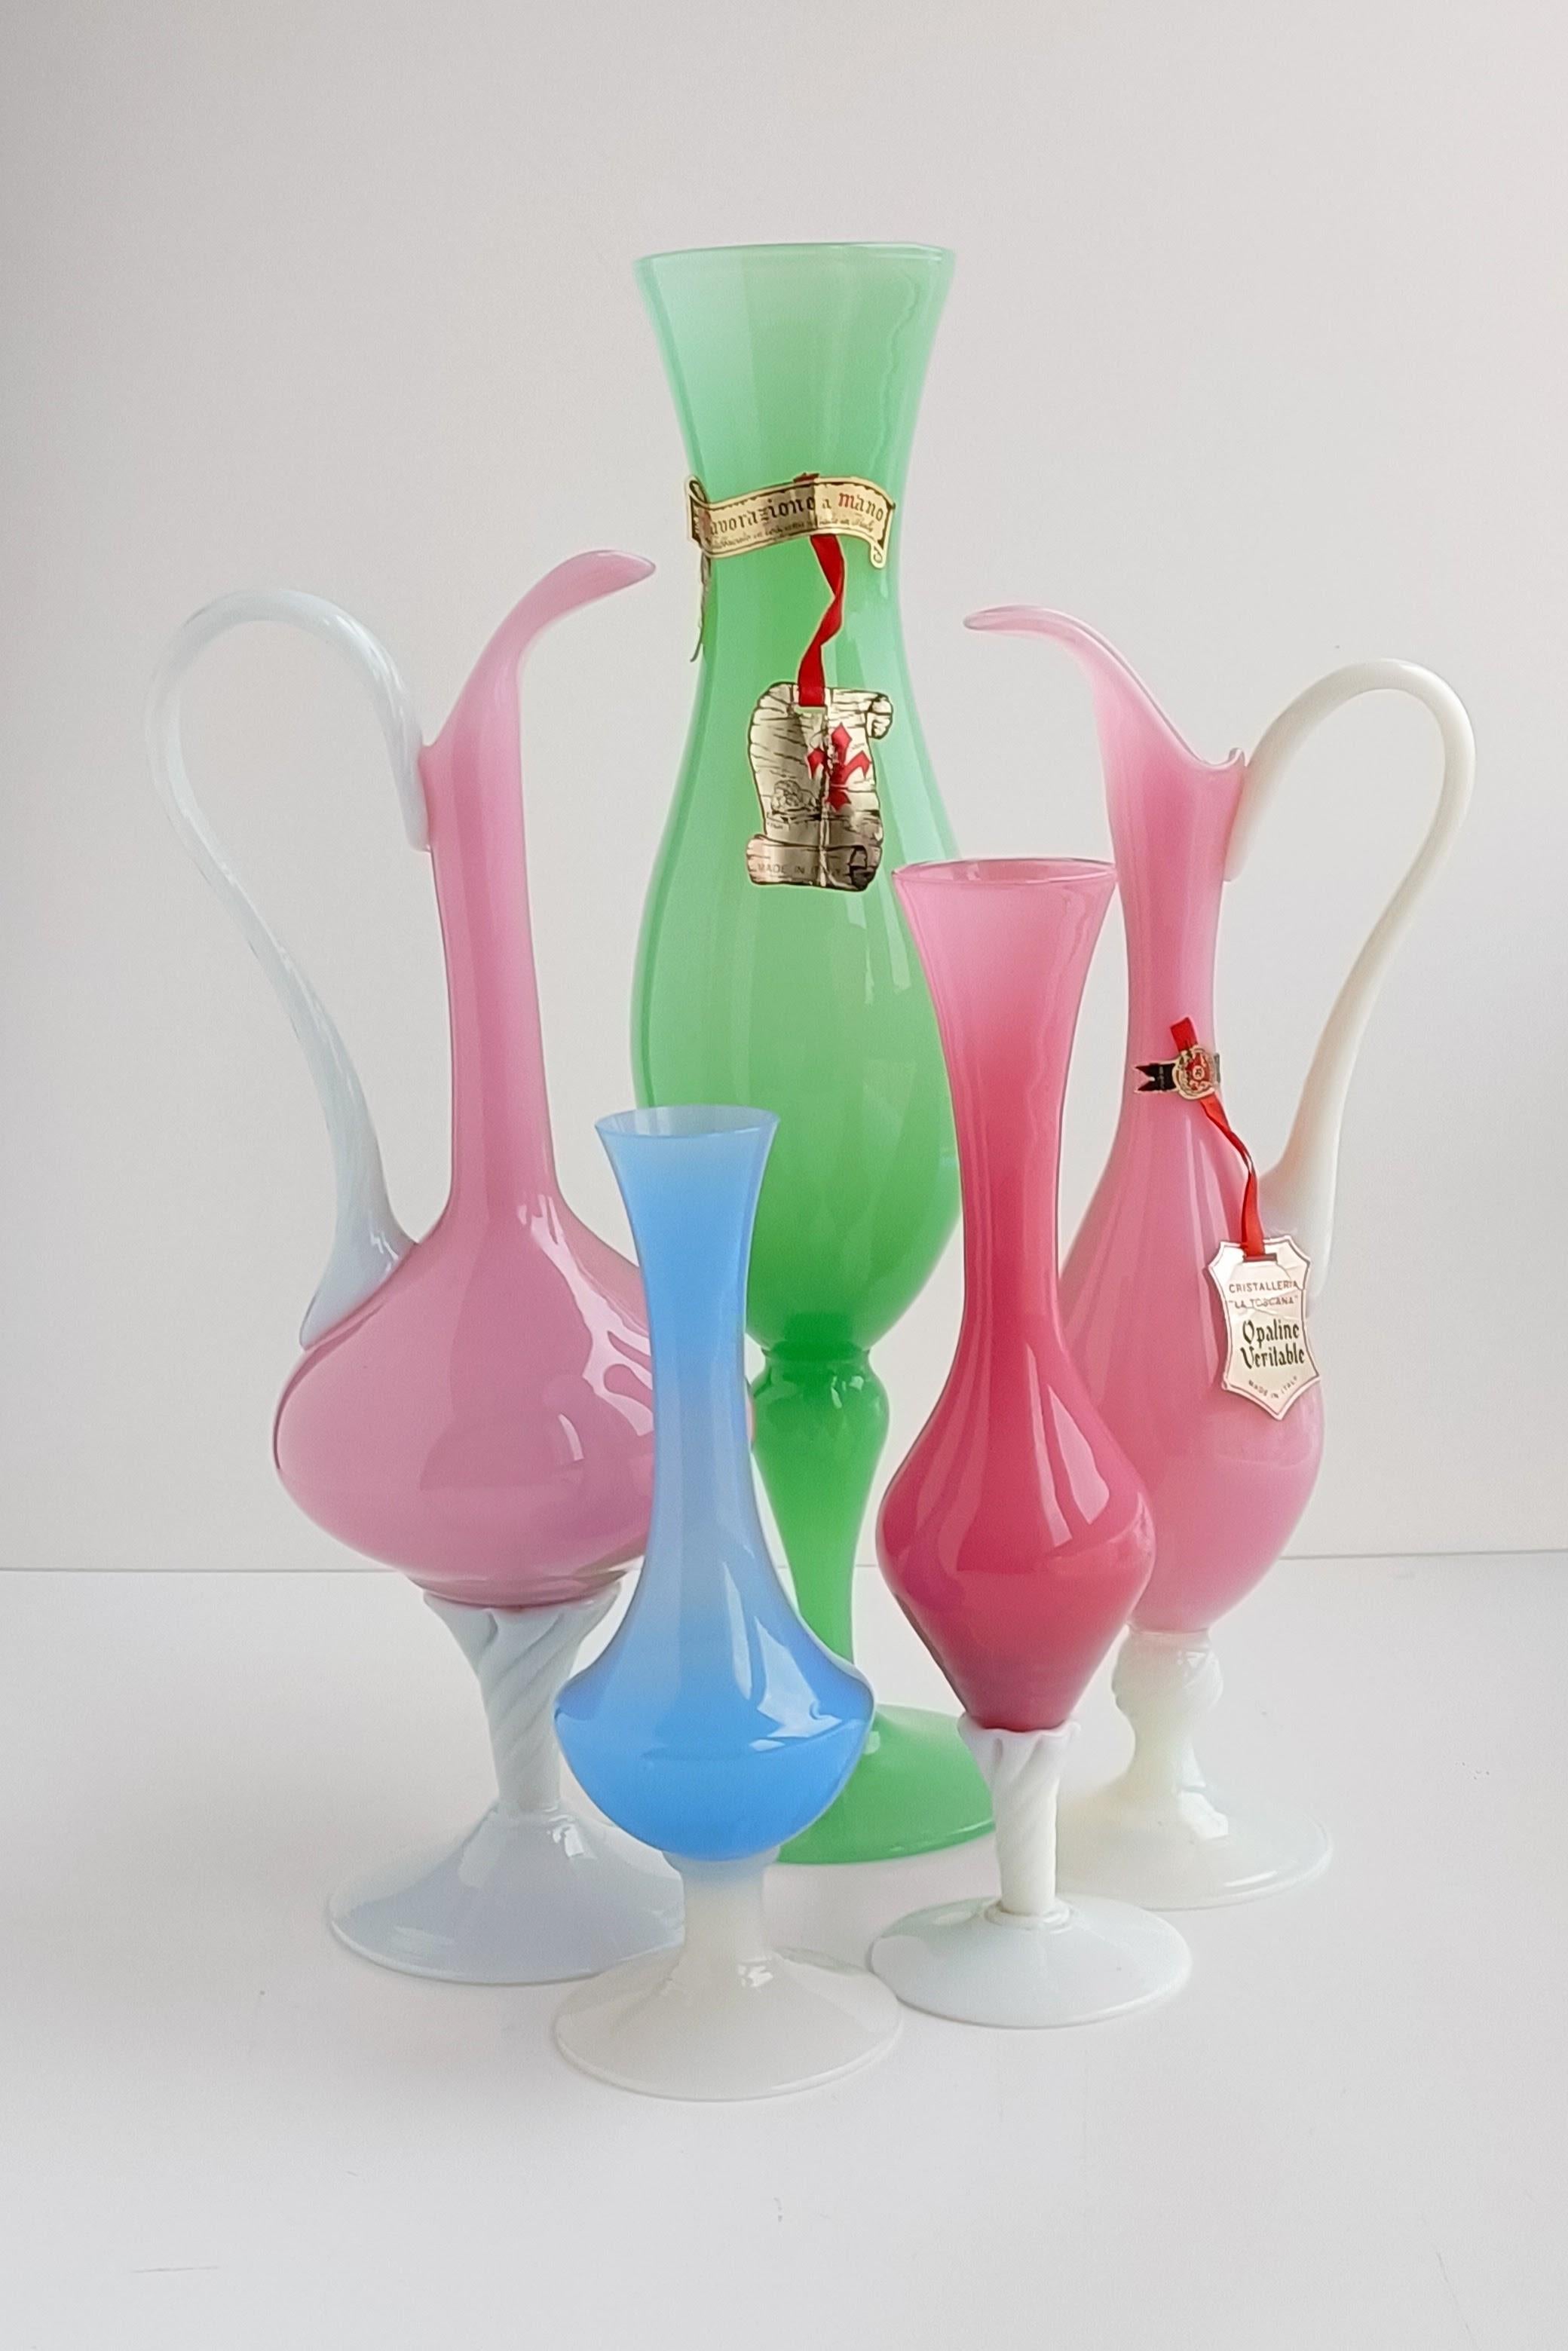 Empoli Glass Opaline Florence Set of Vases, Italy, 1950s.  For Sale 2